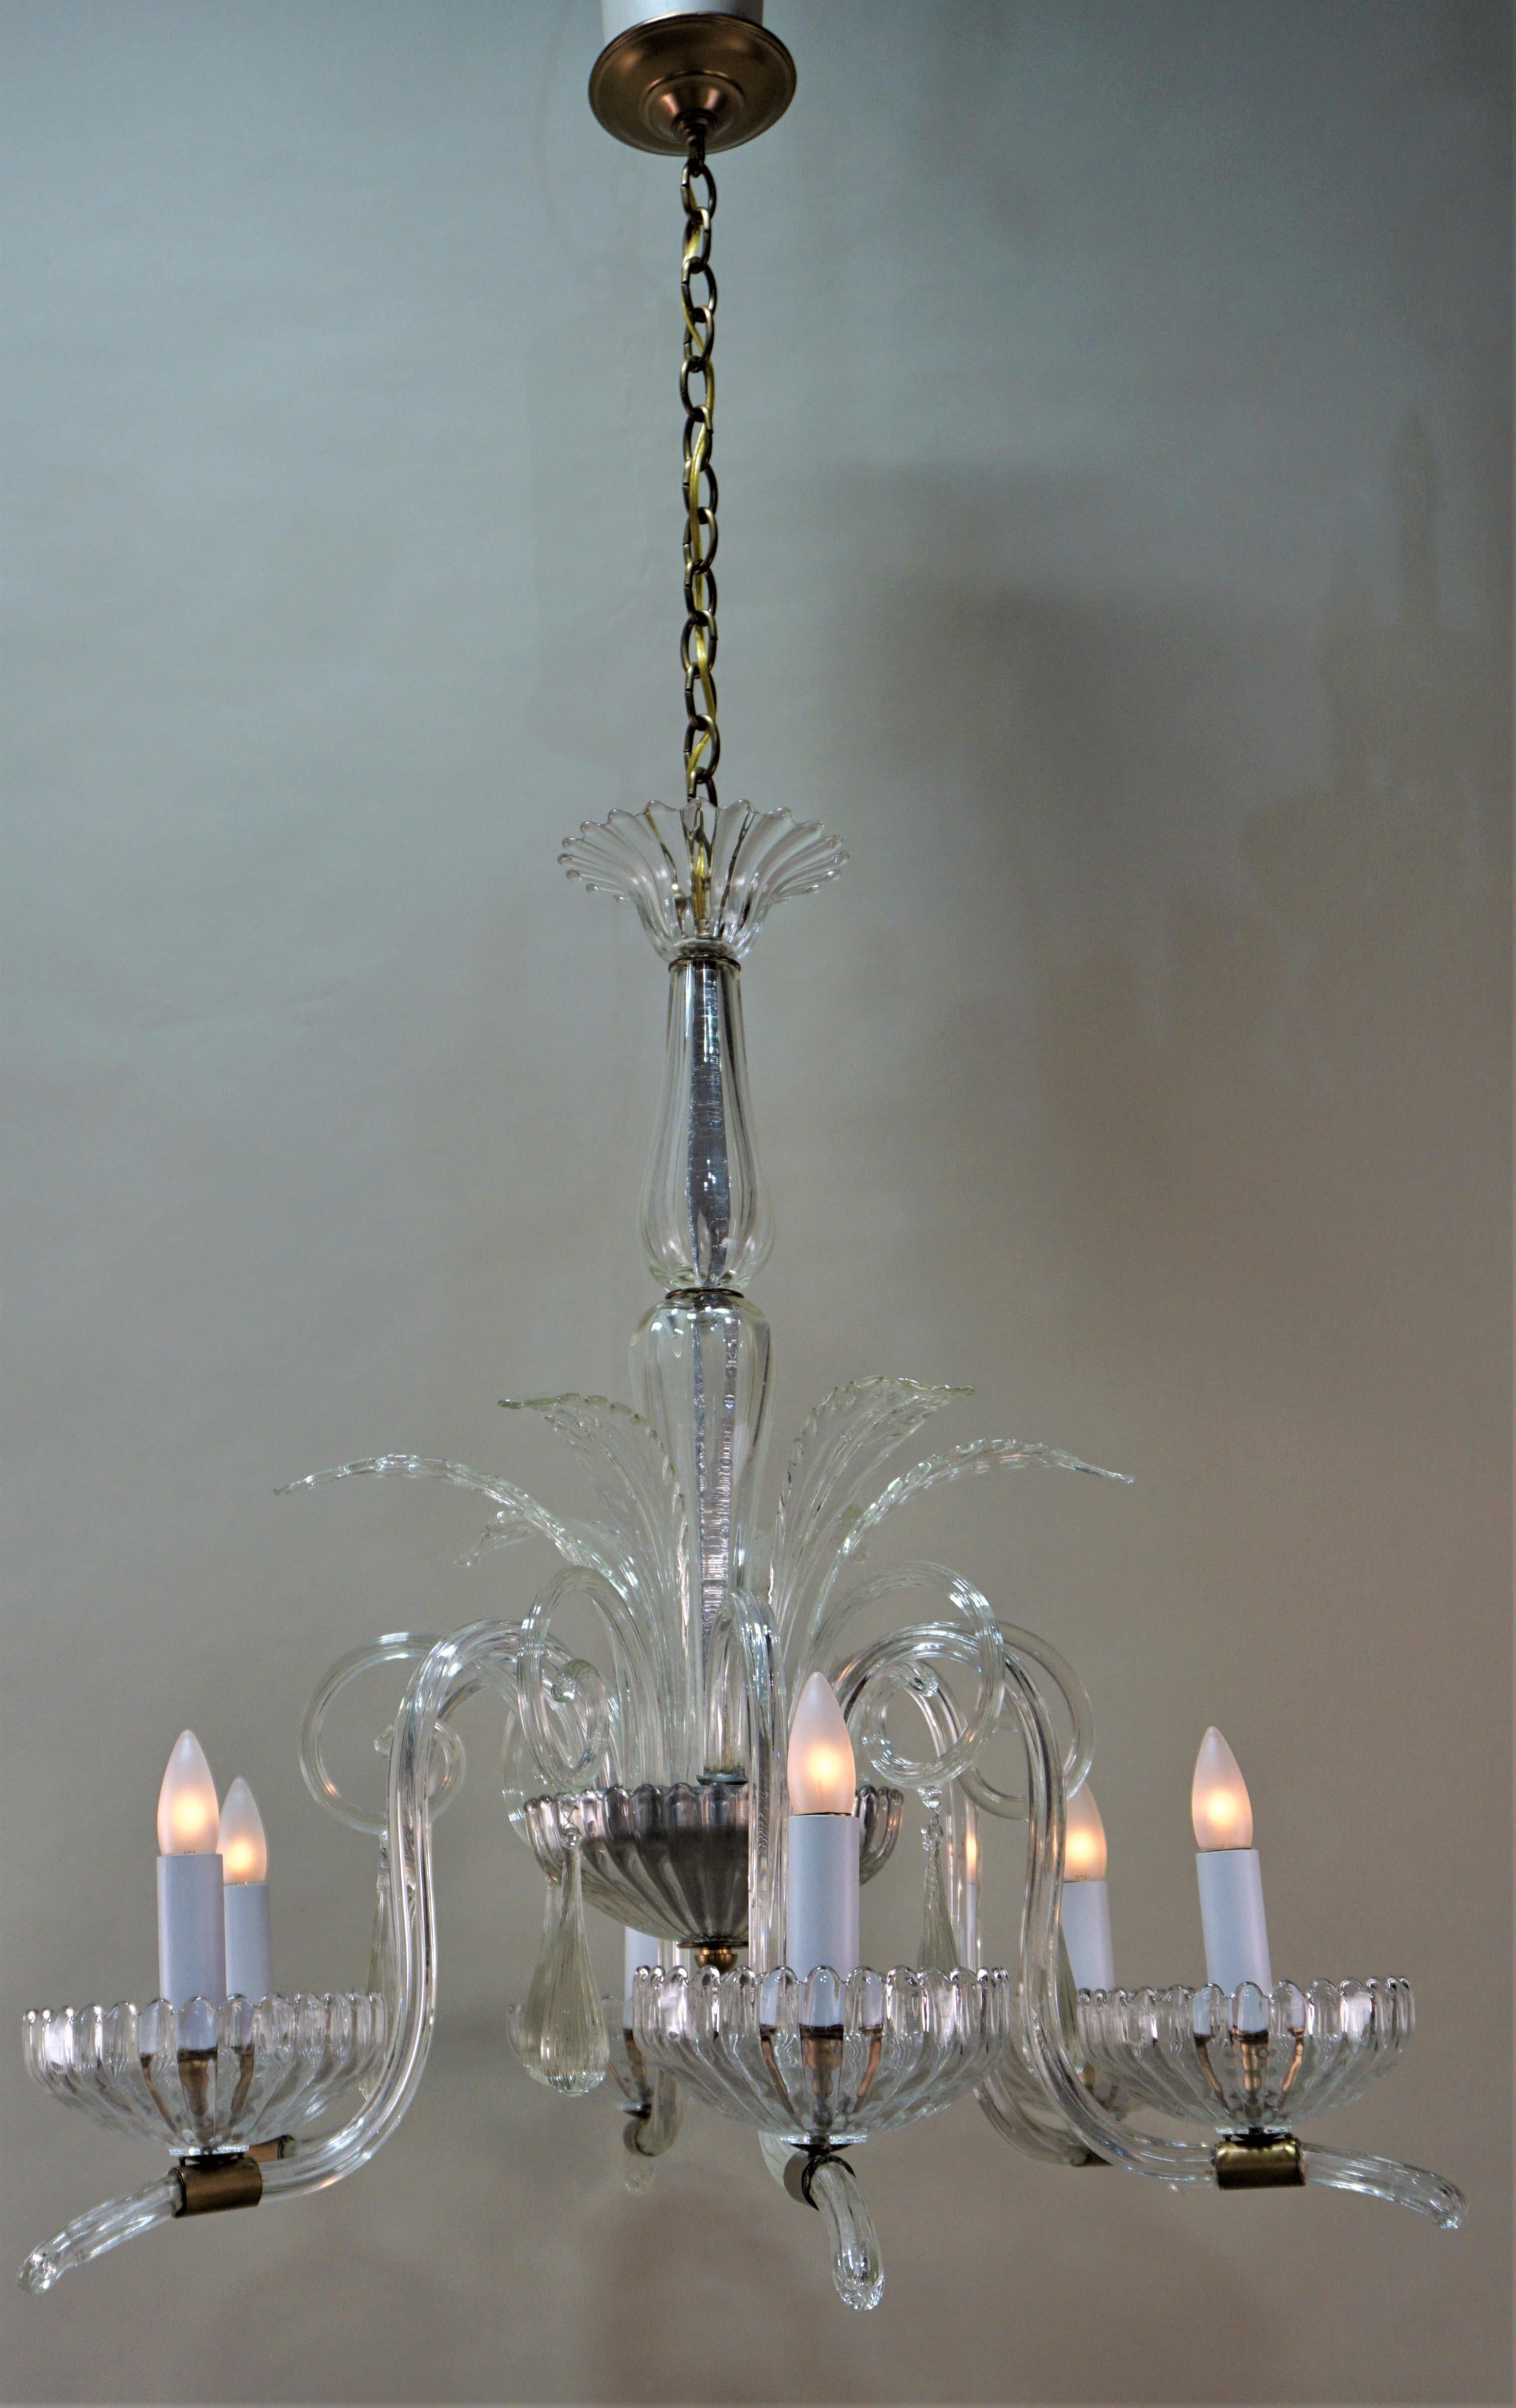 A fabulous blown glass six-arm chandelier by Barovier & Toso.
Measures: Total height 54